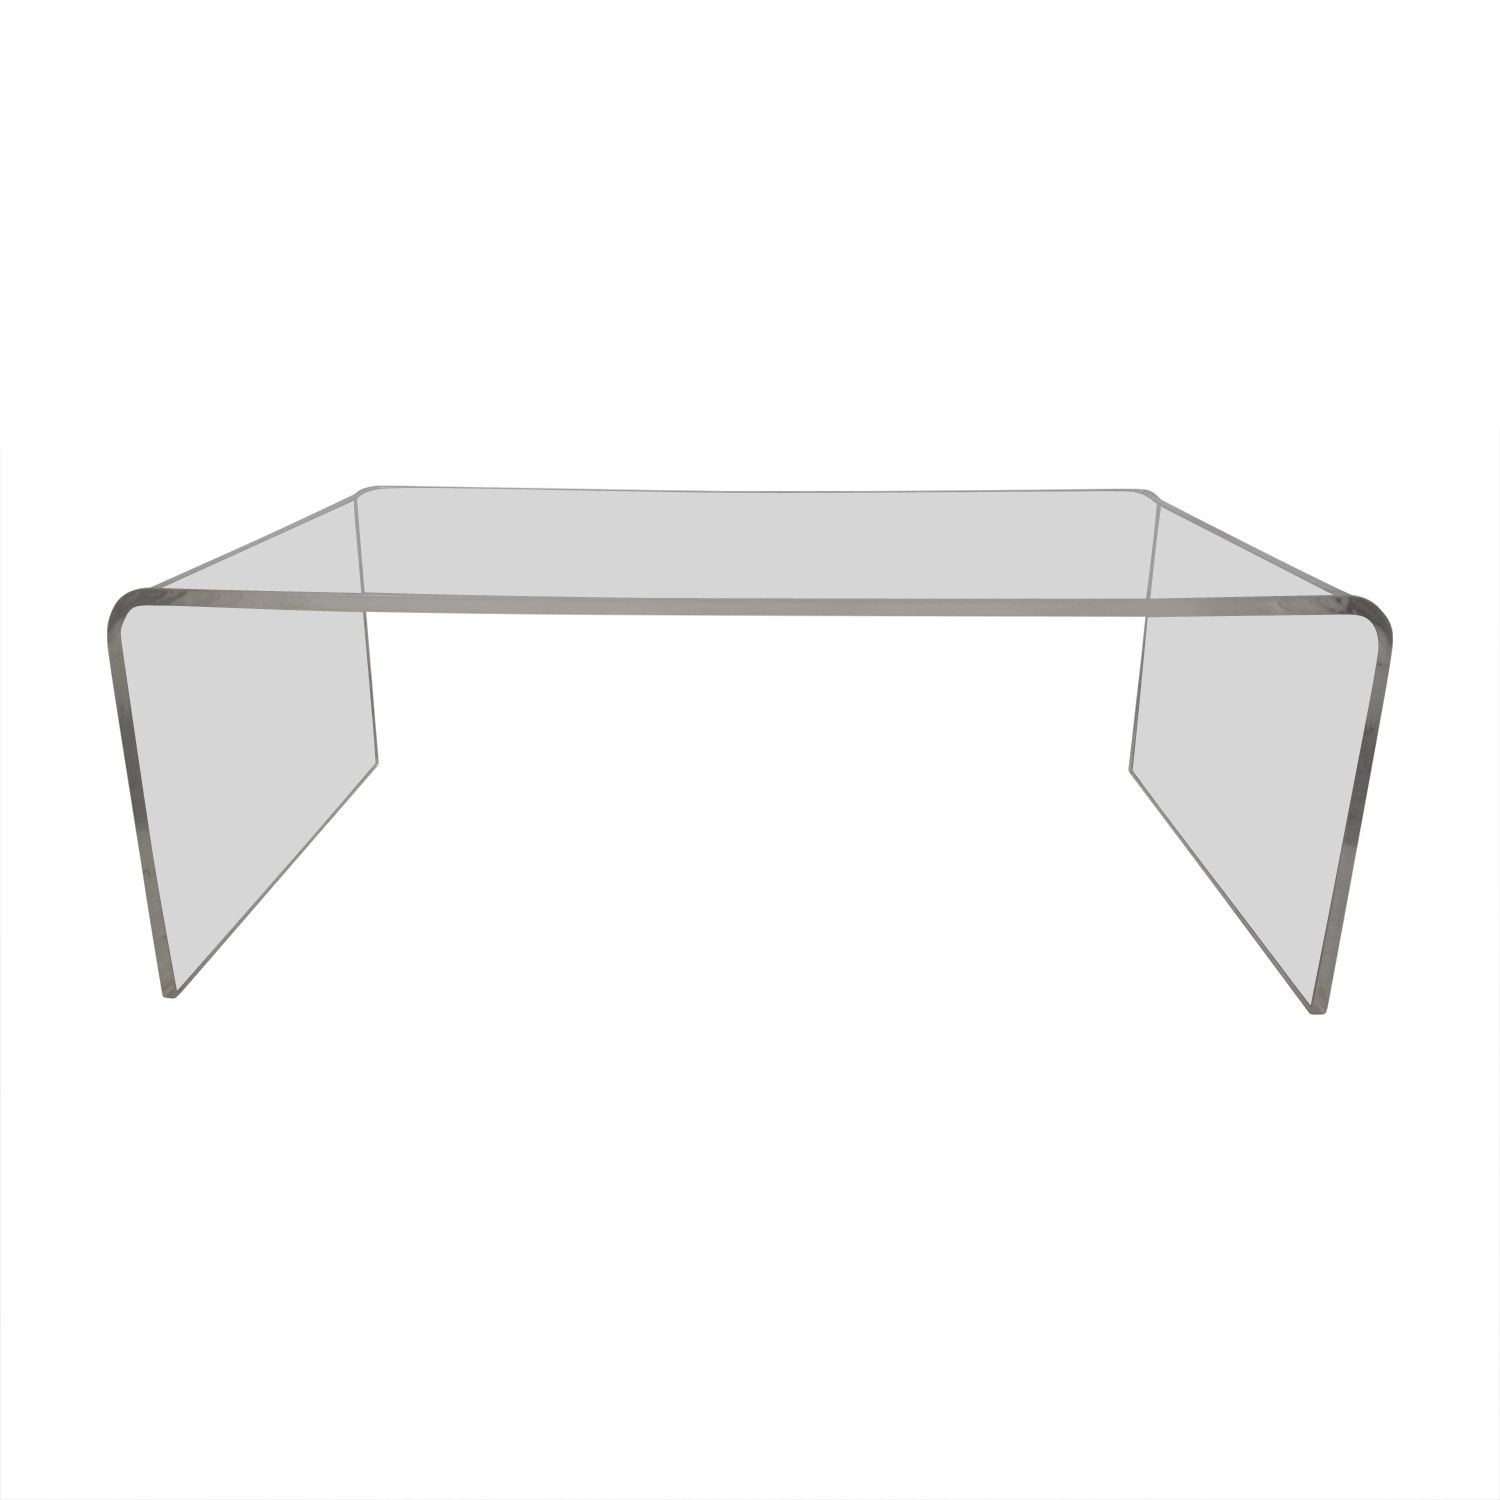 [%79% Off – Cb2 Cb2 Peekaboo Acrylic Ghost Tall Coffee Table / Tables Pertaining To Most Popular Peekaboo Acrylic Tall Coffee Tables|peekaboo Acrylic Tall Coffee Tables Inside Best And Newest 79% Off – Cb2 Cb2 Peekaboo Acrylic Ghost Tall Coffee Table / Tables|2019 Peekaboo Acrylic Tall Coffee Tables Inside 79% Off – Cb2 Cb2 Peekaboo Acrylic Ghost Tall Coffee Table / Tables|2018 79% Off – Cb2 Cb2 Peekaboo Acrylic Ghost Tall Coffee Table / Tables With Peekaboo Acrylic Tall Coffee Tables%] (View 1 of 20)